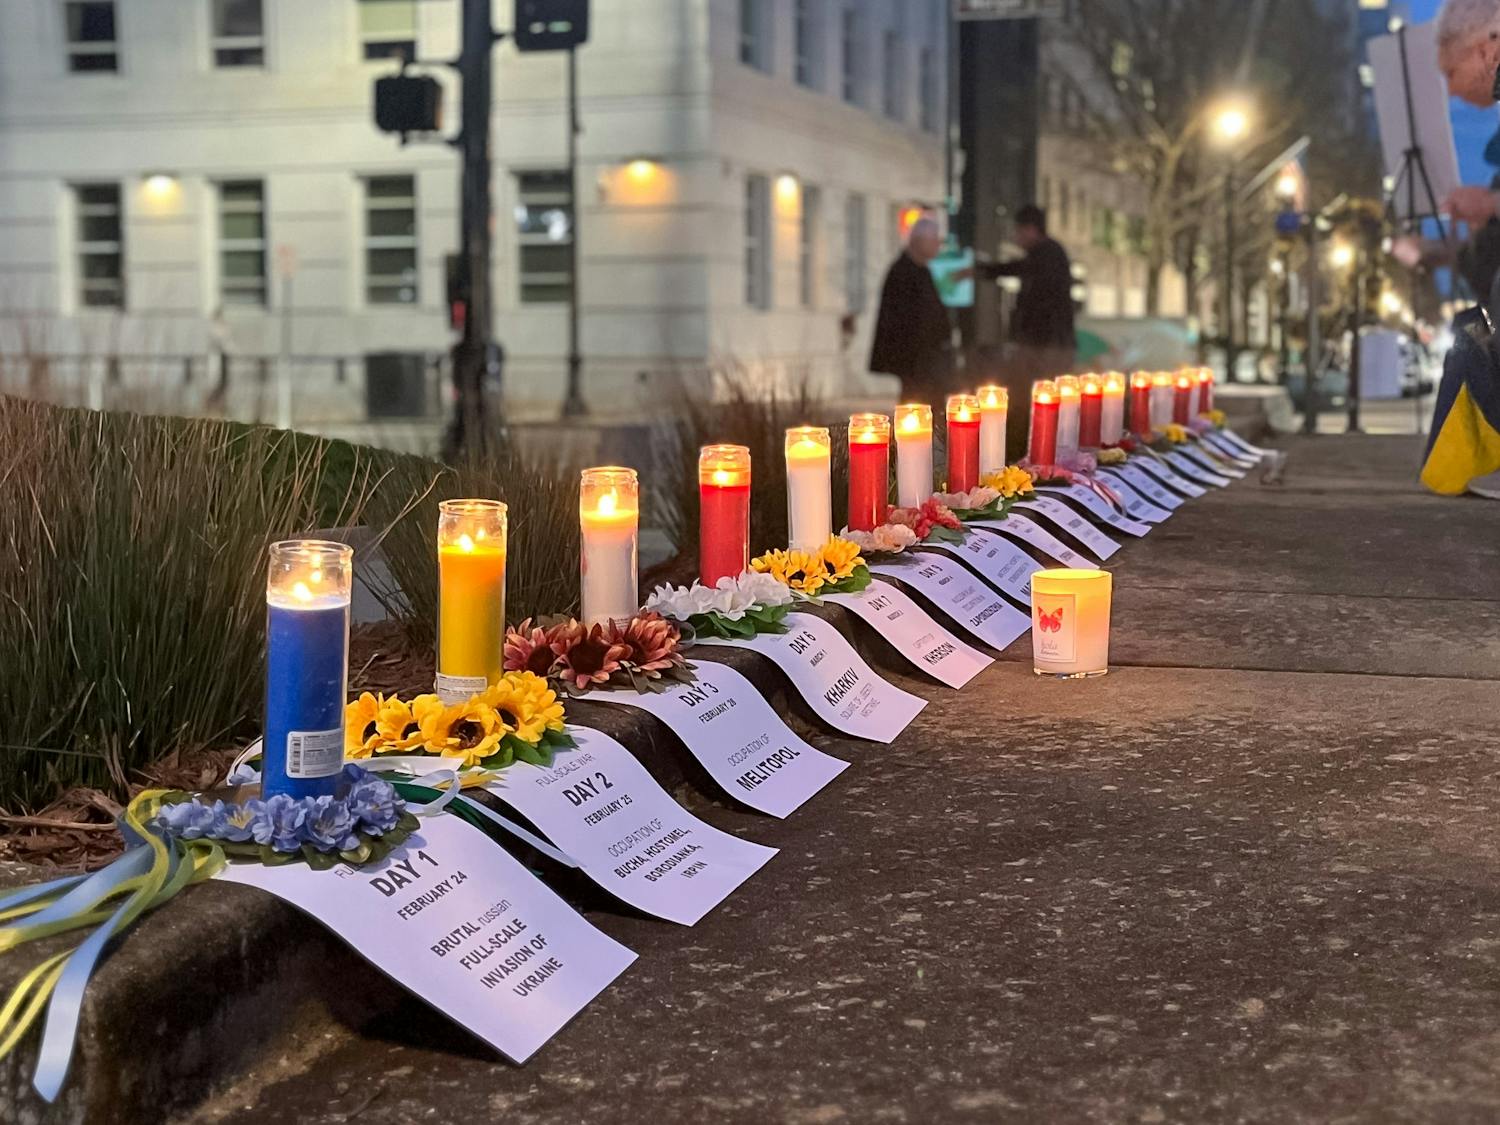 Candles are lit in front of the North Carolina State Capitol on Friday, Feb. 24, 2023, to recognize one year of Ukrainian resilience and to honor those affected by Russia's invasion of Ukraine in 2022.
Photo Courtesy of Eliza Benbow.